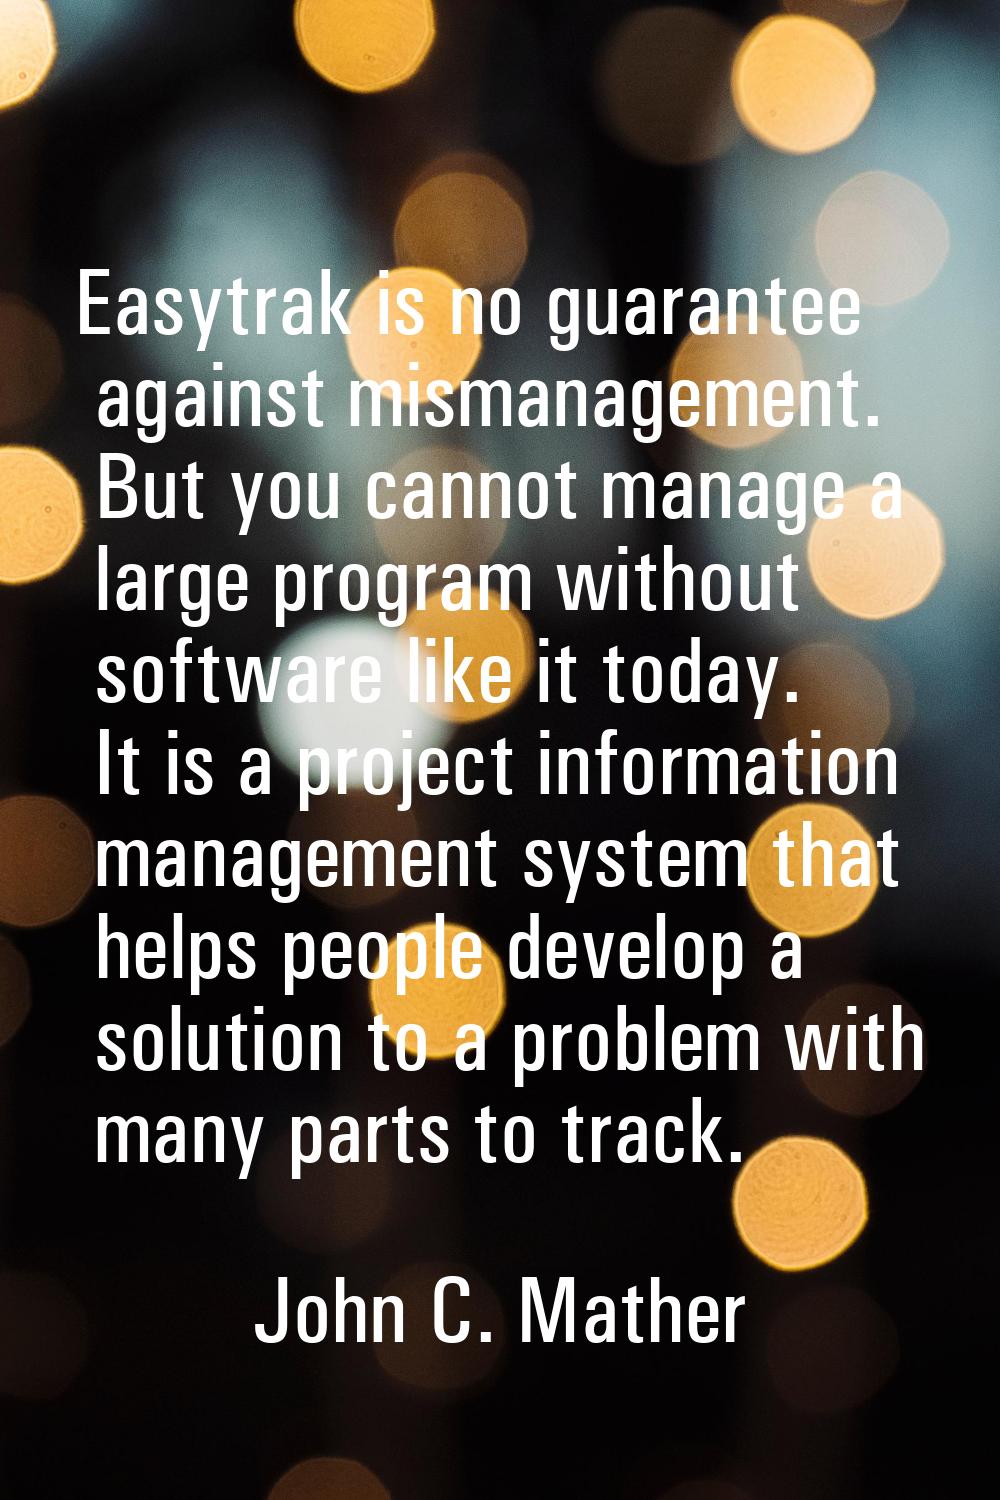 Easytrak is no guarantee against mismanagement. But you cannot manage a large program without softw